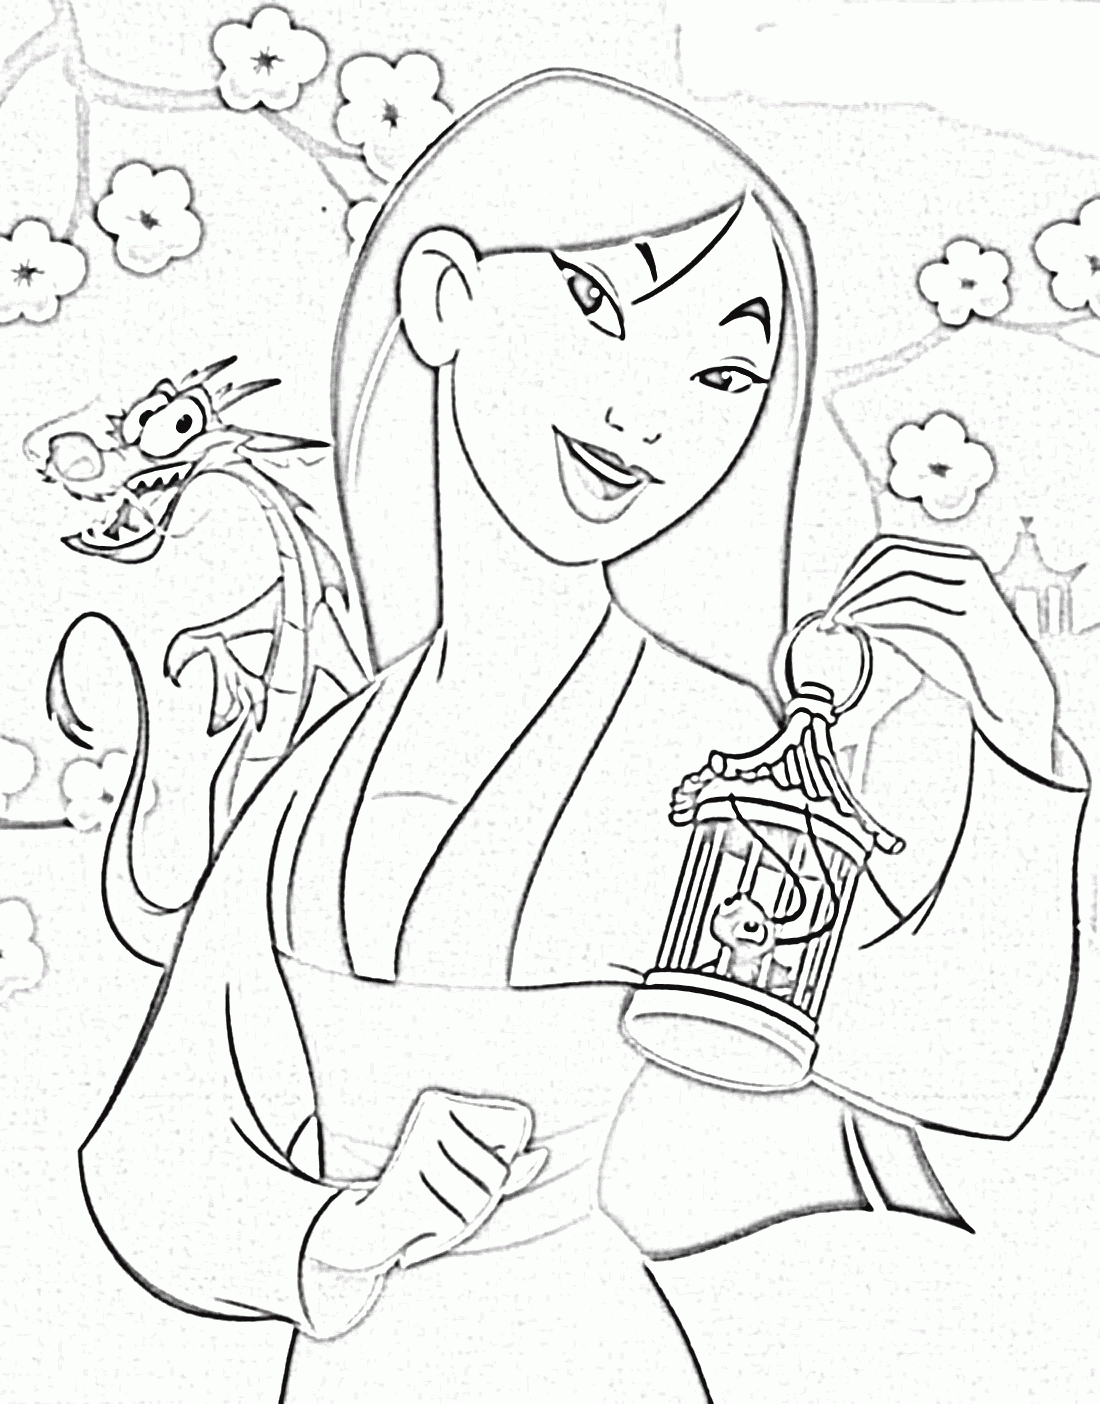 Disney Photos Mulan Coloring Pages Coloring Pages For Kids #9x ...